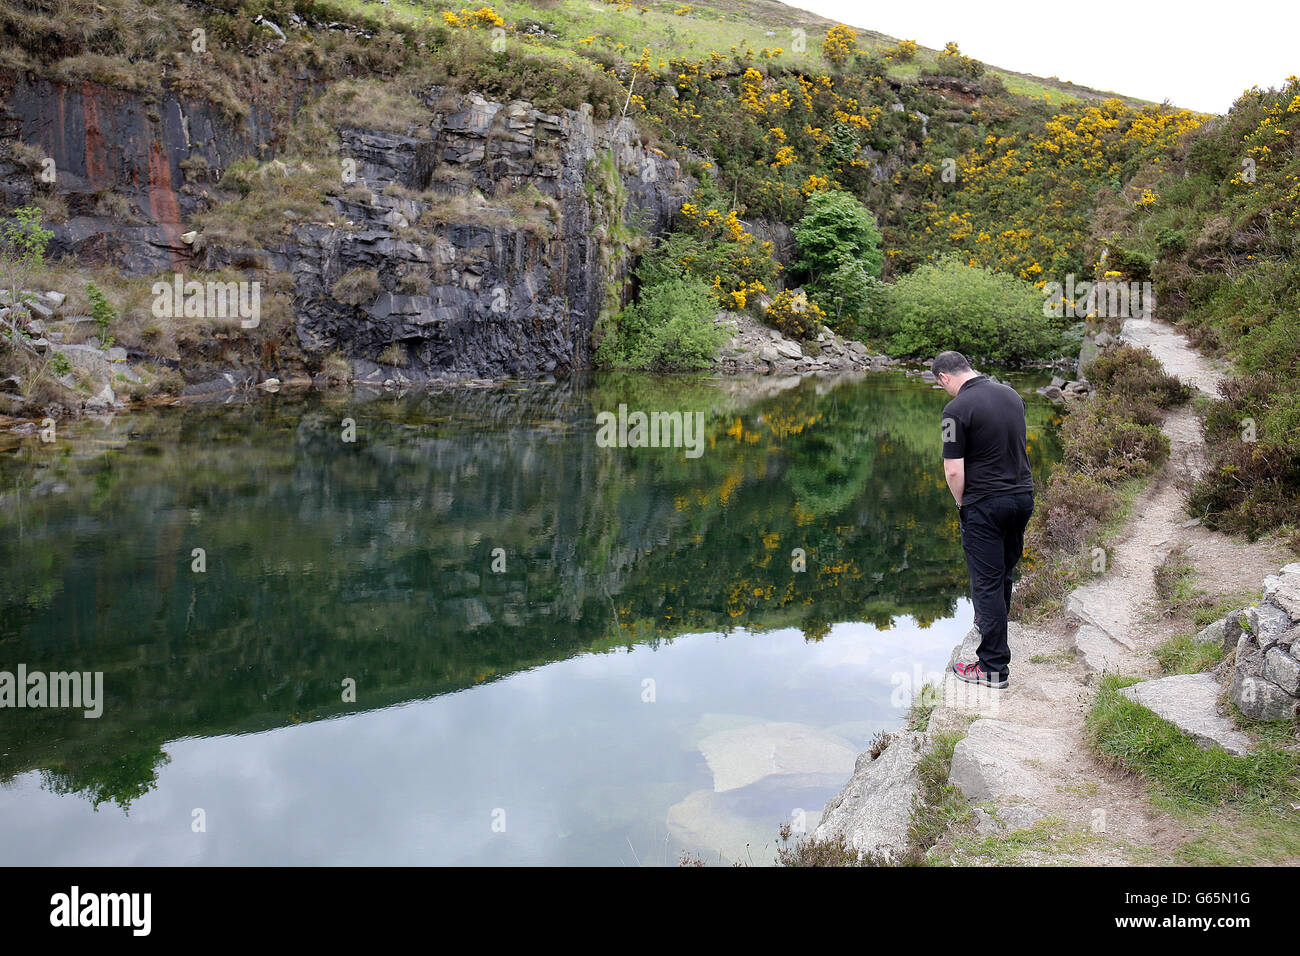 The remote disused quarry in rural Co Down, Northern Ireland, where Colin Polland died in a bid to save Kevin O'Hare 15, who got into difficulties when swimming in the quarry, but also died. Stock Photo